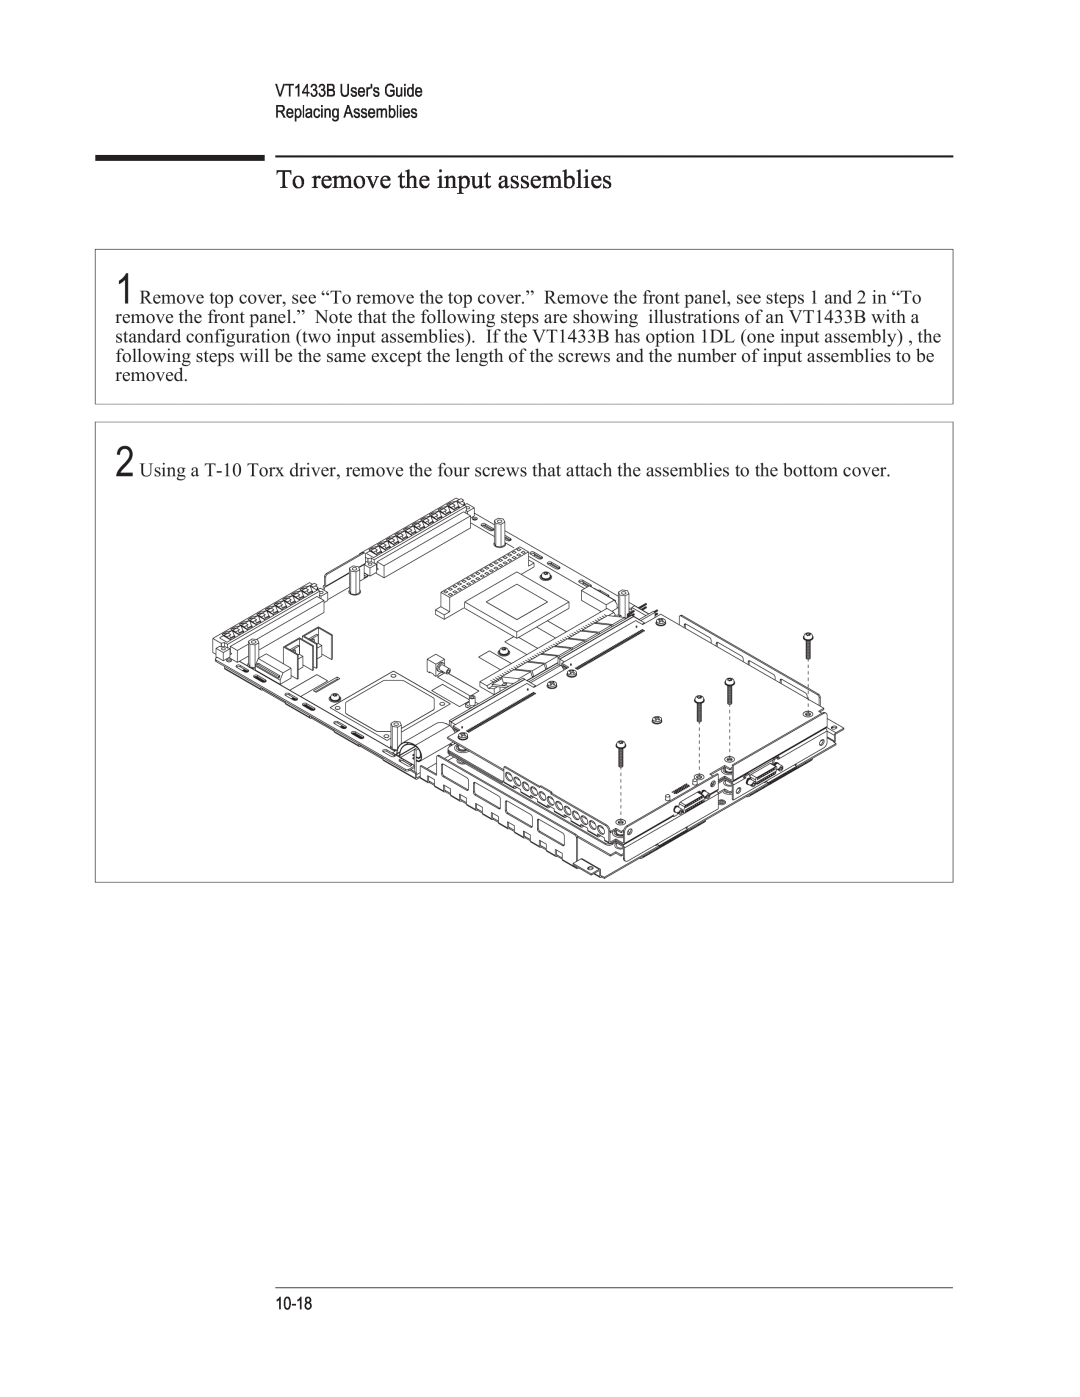 VXI manual To remove the input assemblies, VT1433B Users Guide Replacing Assemblies, 10-18 